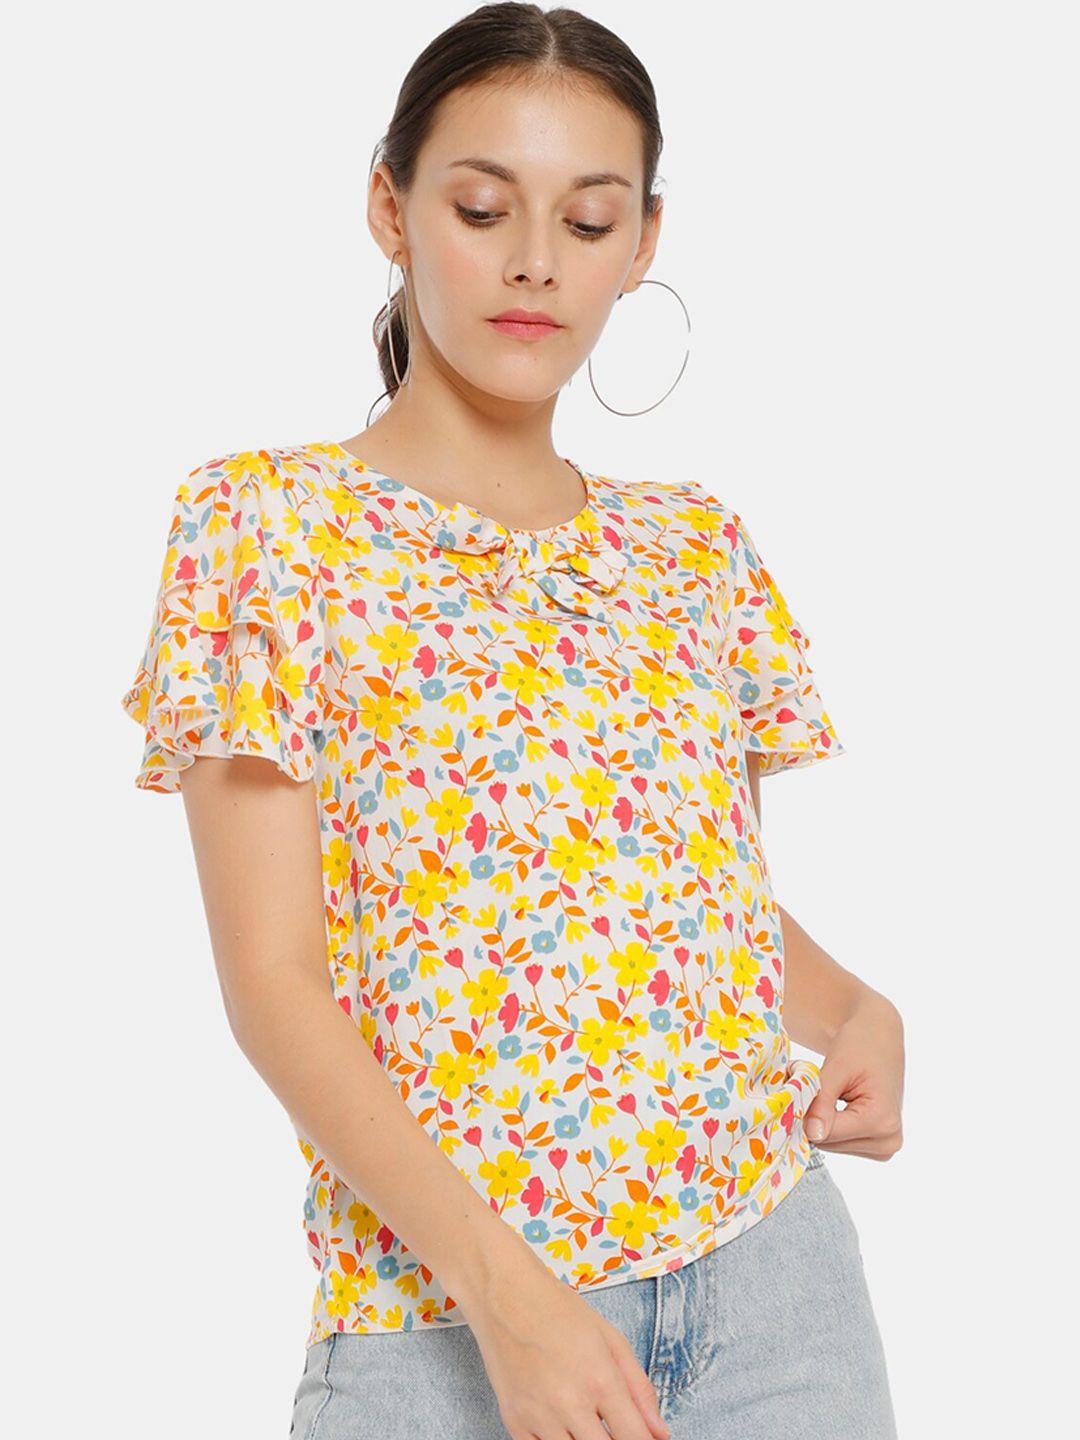 sugr off white & yellow floral printed regular top